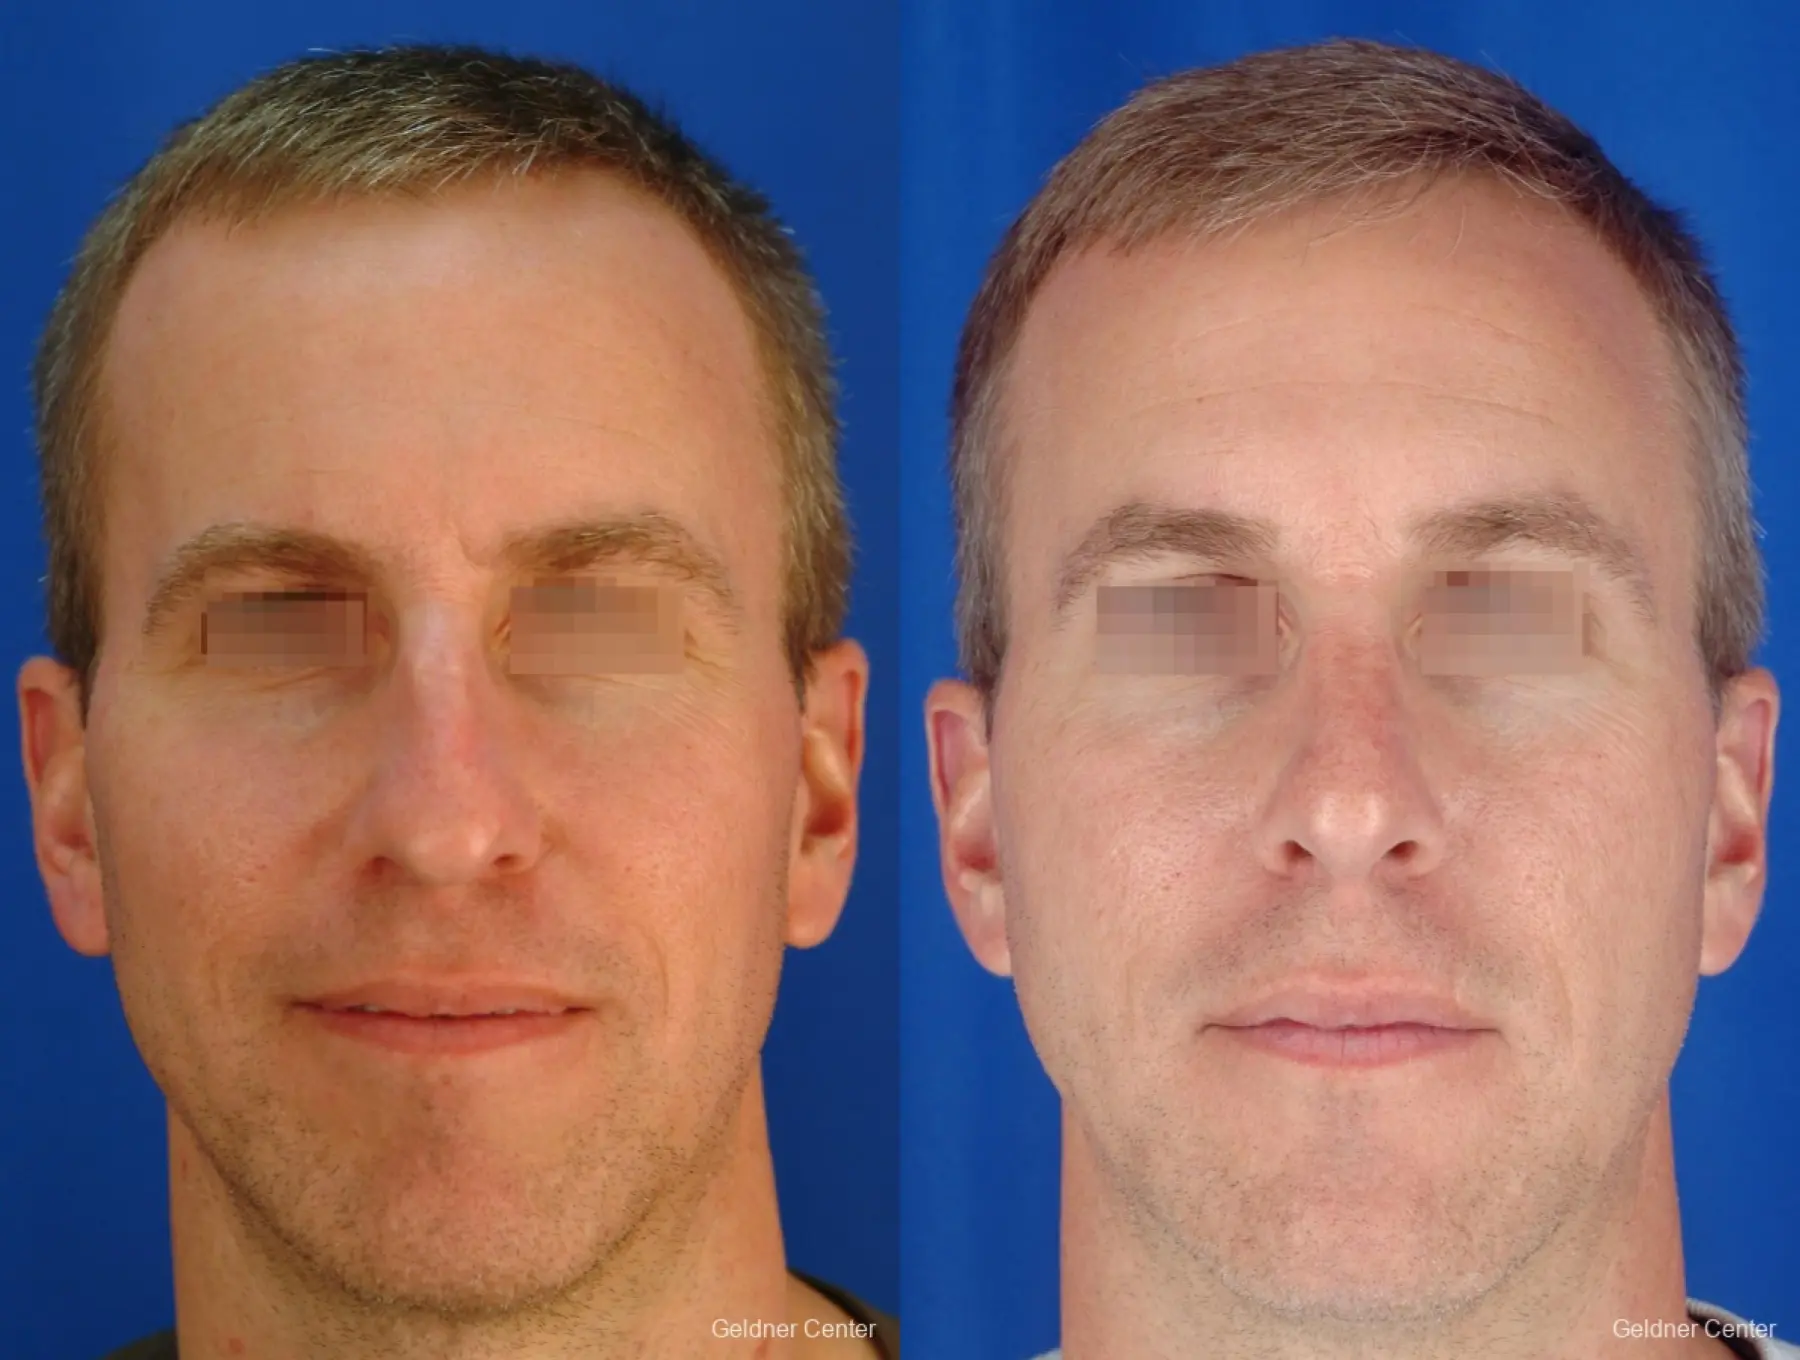 Rhinoplasty-for-men: Patient 1 - Before and After  